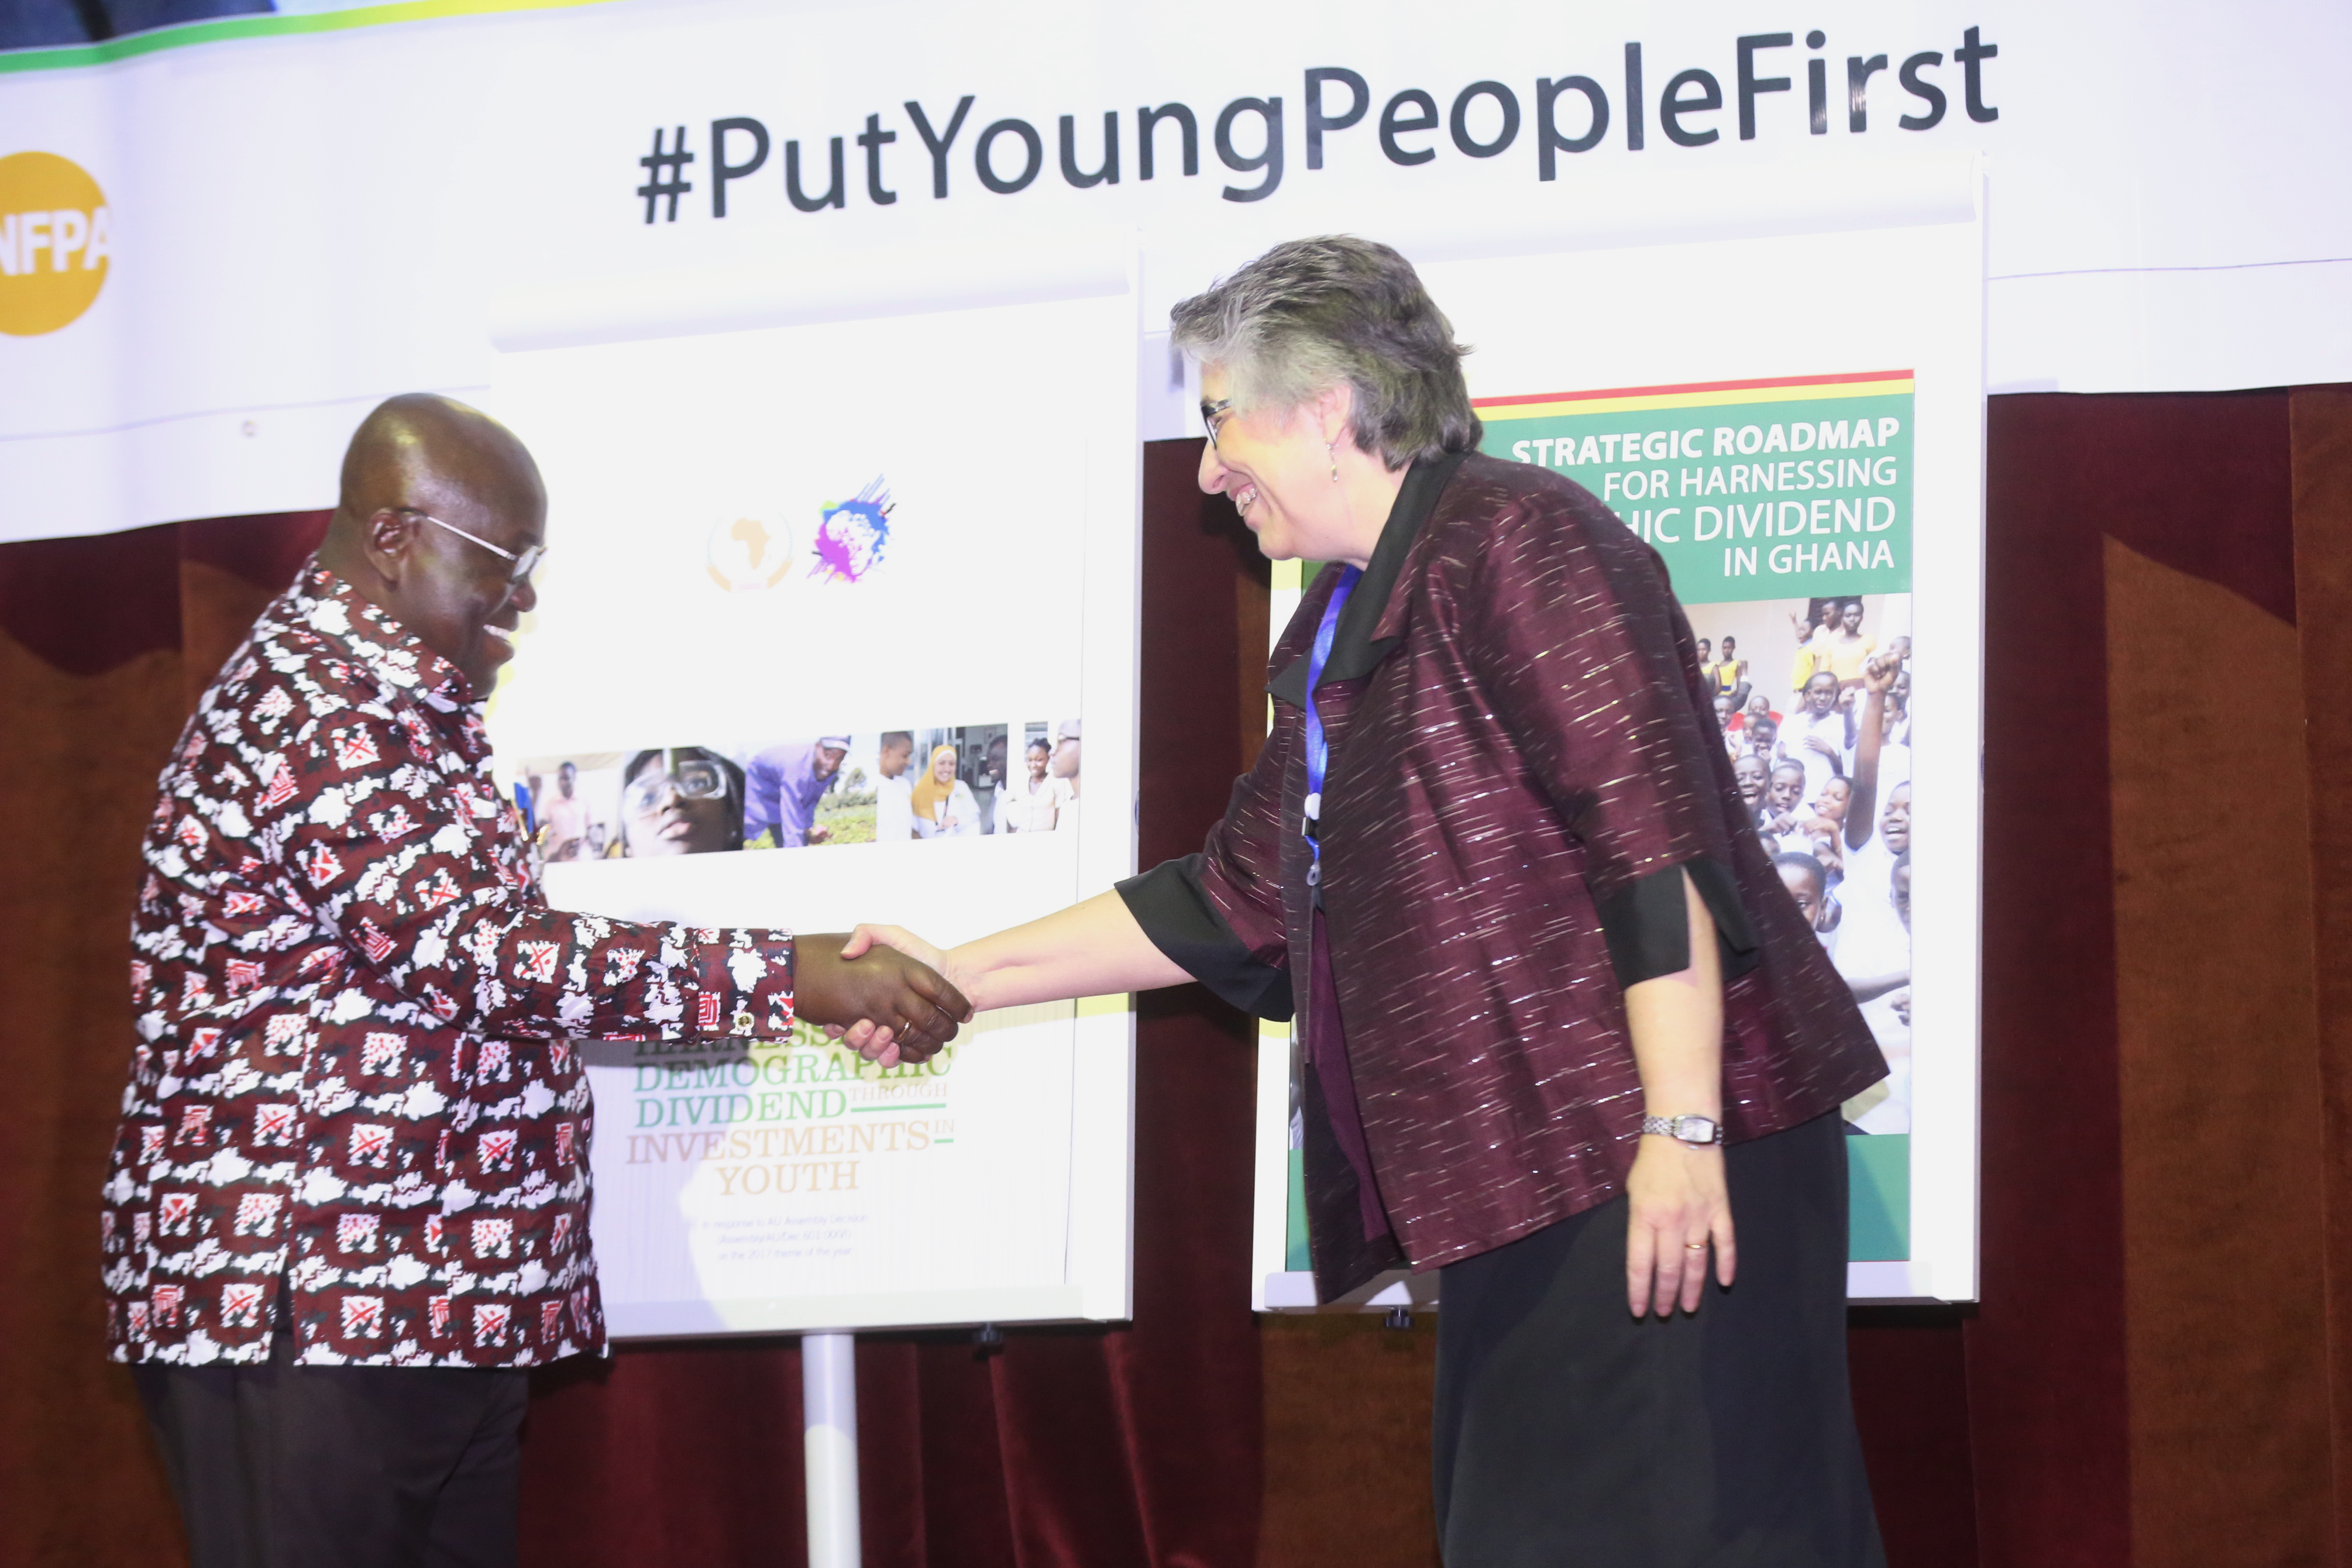 President Akufo-Addo in a handshake with Ms Christine Evans Klock, UN Country Director after unveiling the Demography Roadmap for Harnessing Demographic Dividend in Ghana.